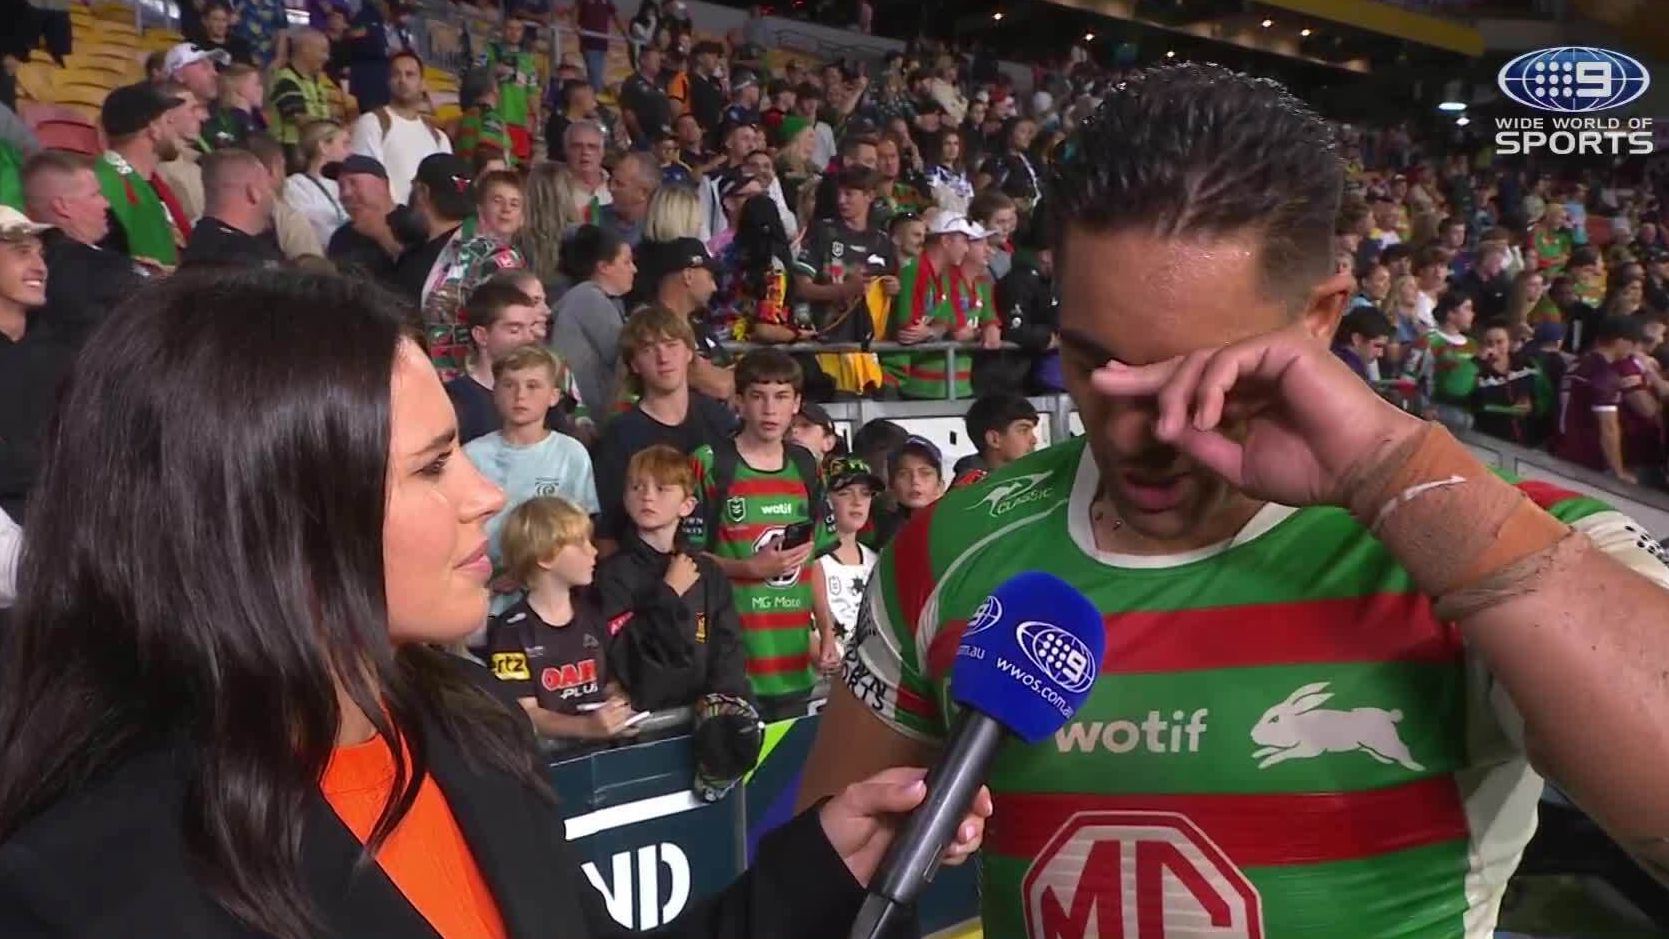 Tevita Tatola delivered a touching post-match tribute to his father.